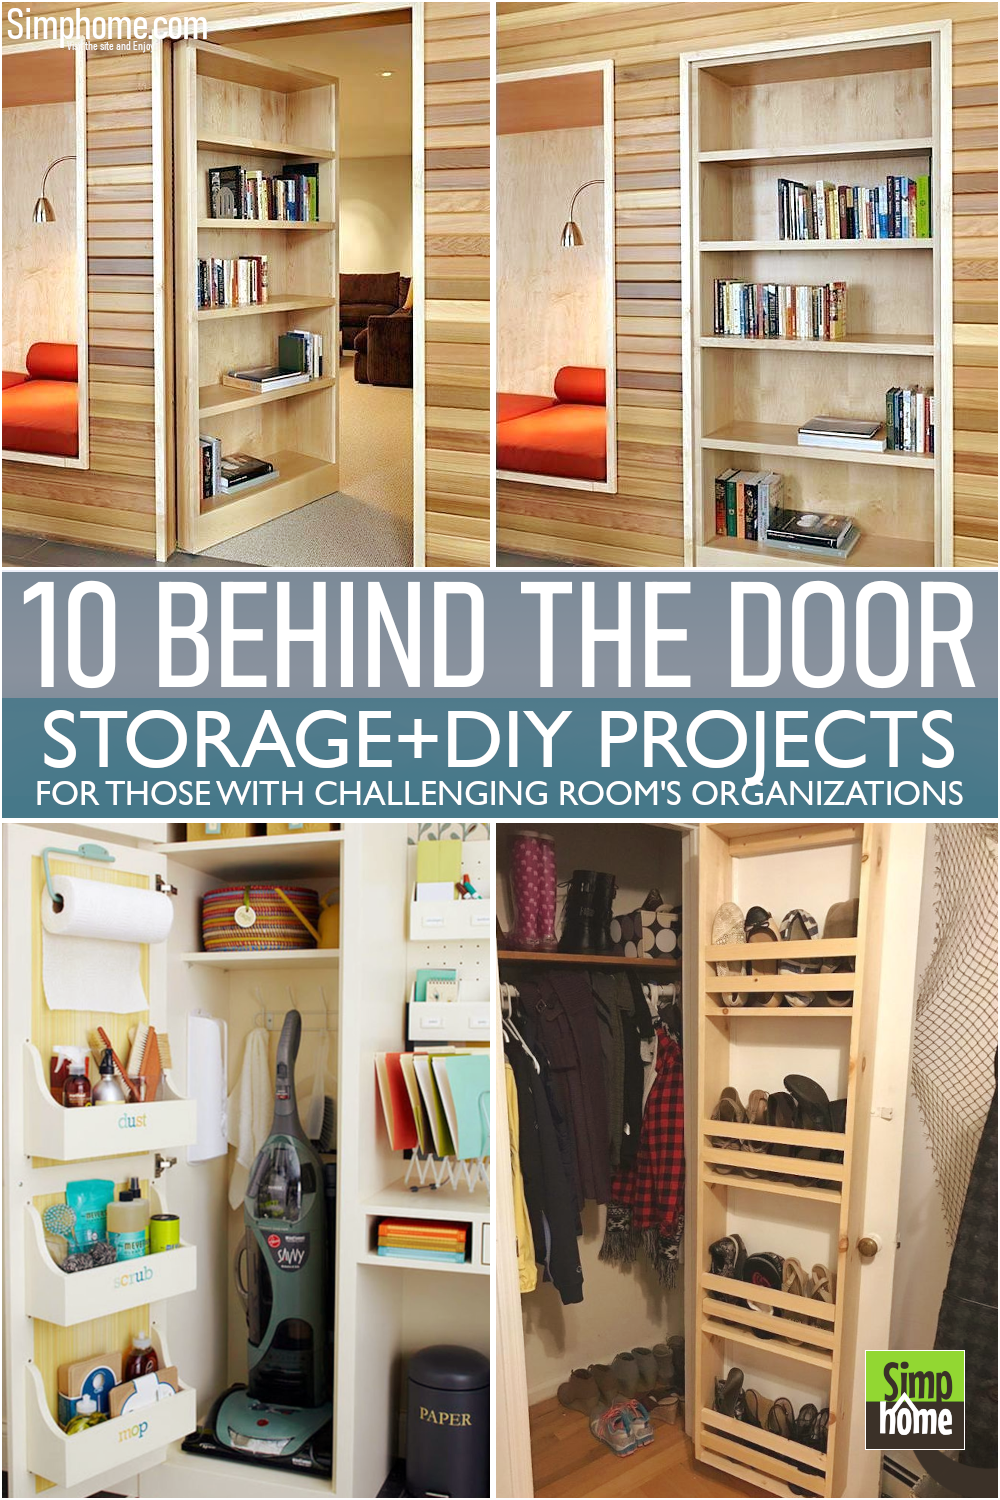 This is the 10 Behind the door storage DIY projects 